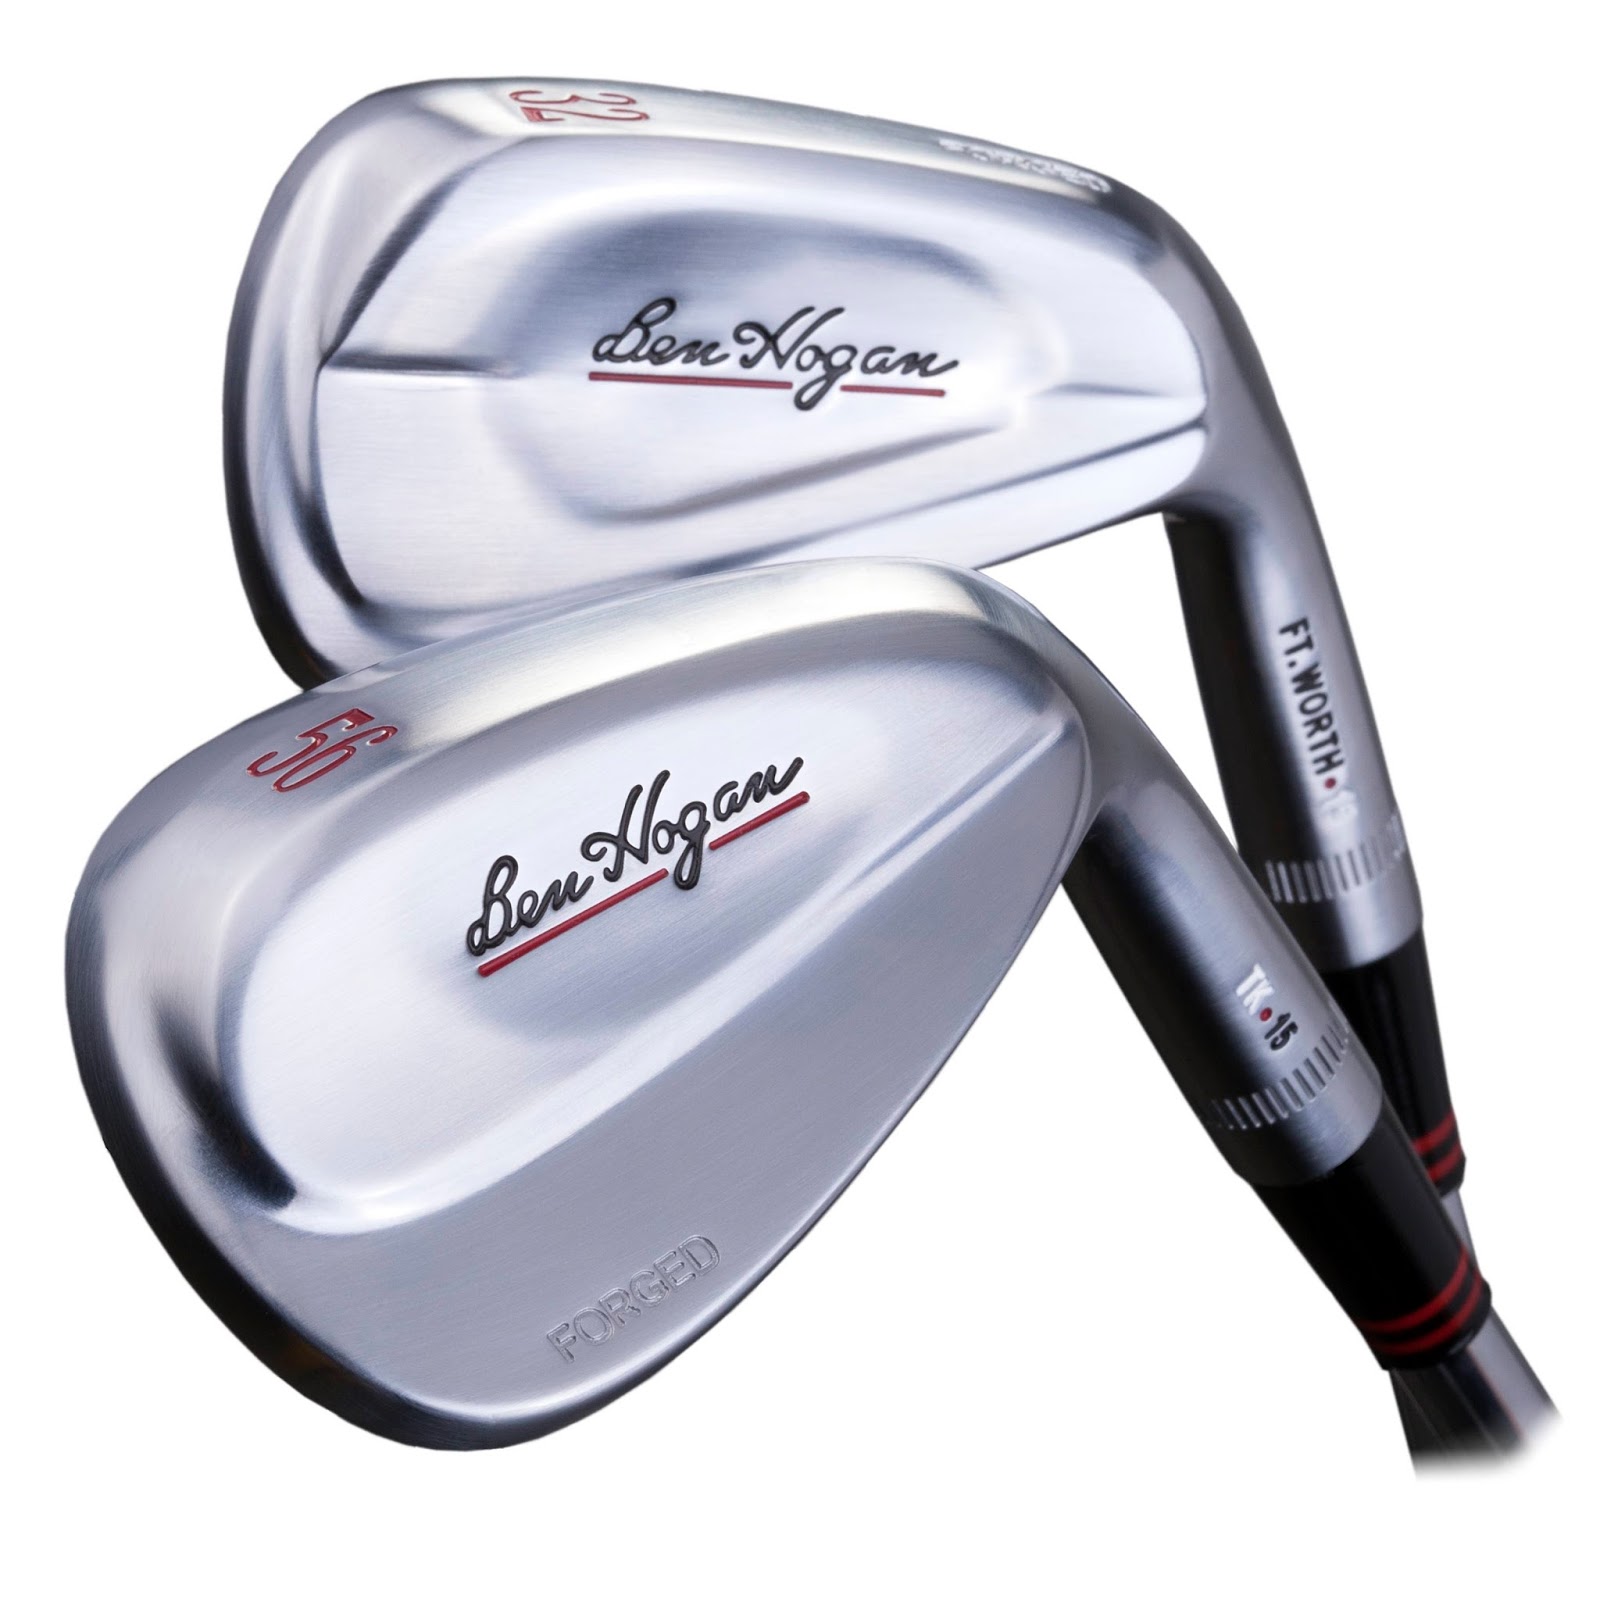 American Hogan Golf Equipment Now Available in PGA Superstore